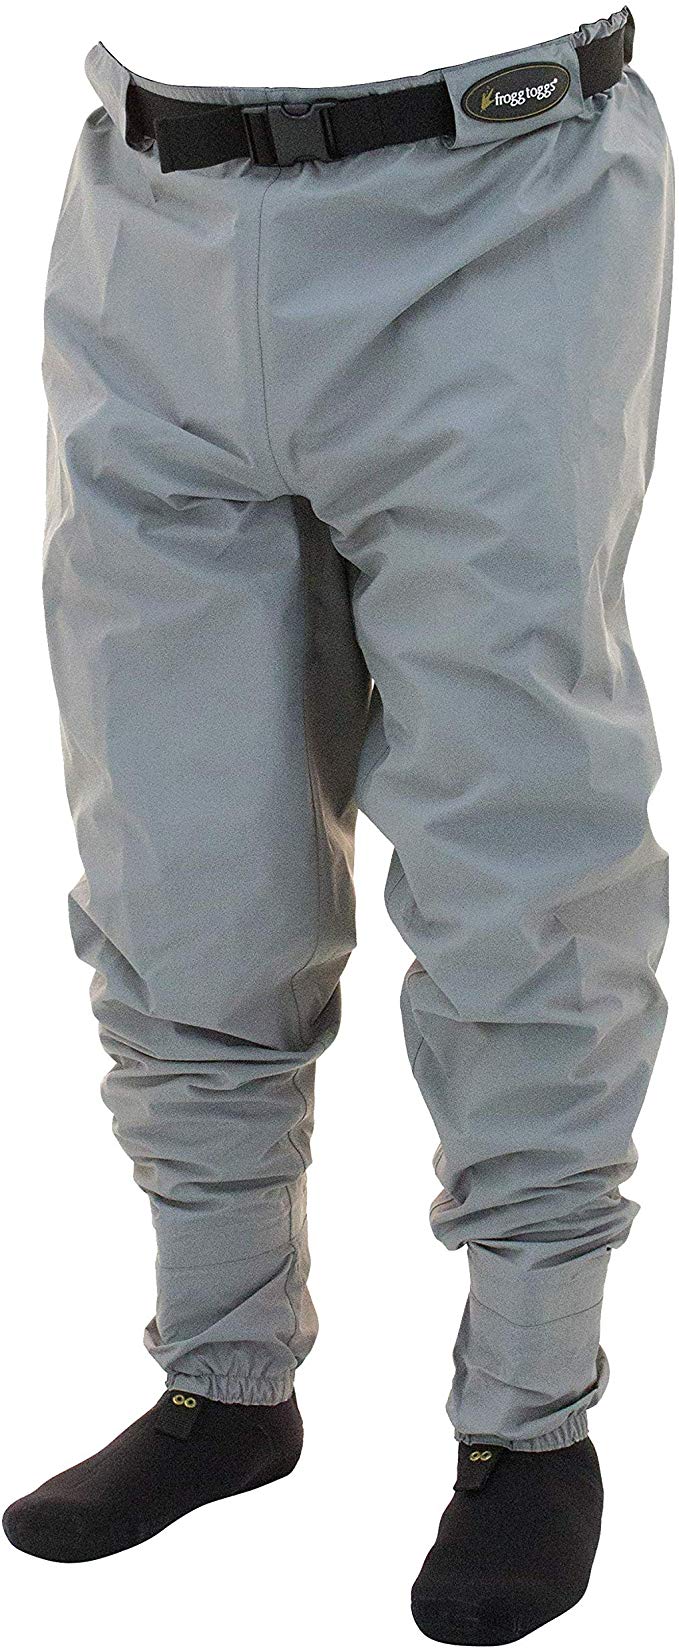 Frogg Toggs Hellbender Stockingfoot Breathable Guide Pant XL